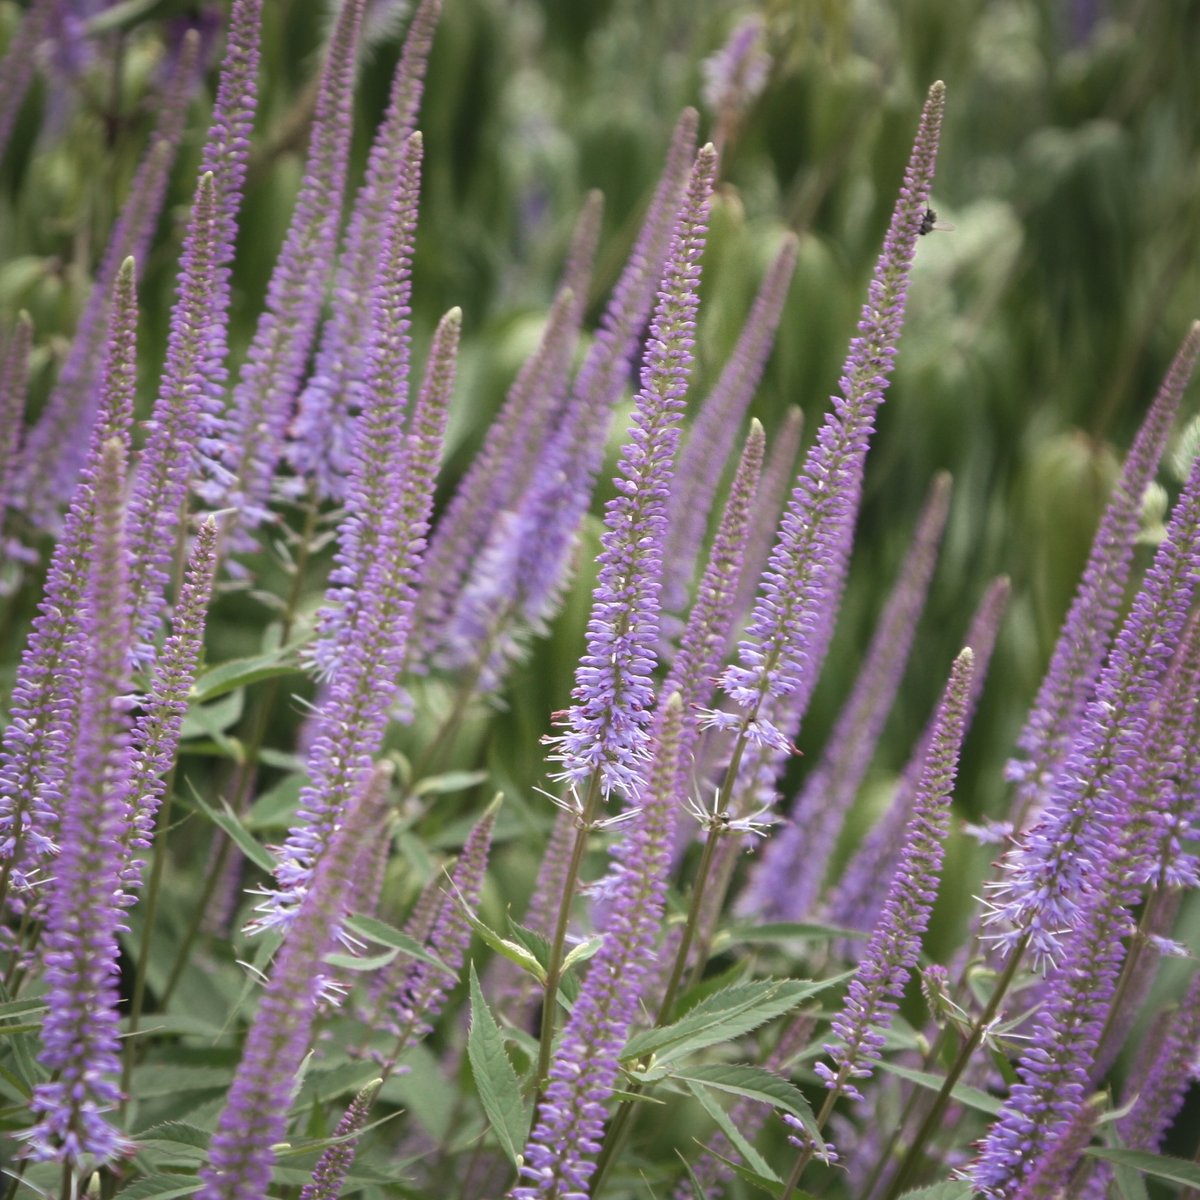 Veronicastrum virginicum 'Fascination' is one of our favourite plants for this time of year. It has delicate, bluey-mauve flowers on self-supporting spires that will bring vertical interest to your garden. Discover more at crocus.co.uk/august-choice/ #mycrocus #gardenideas